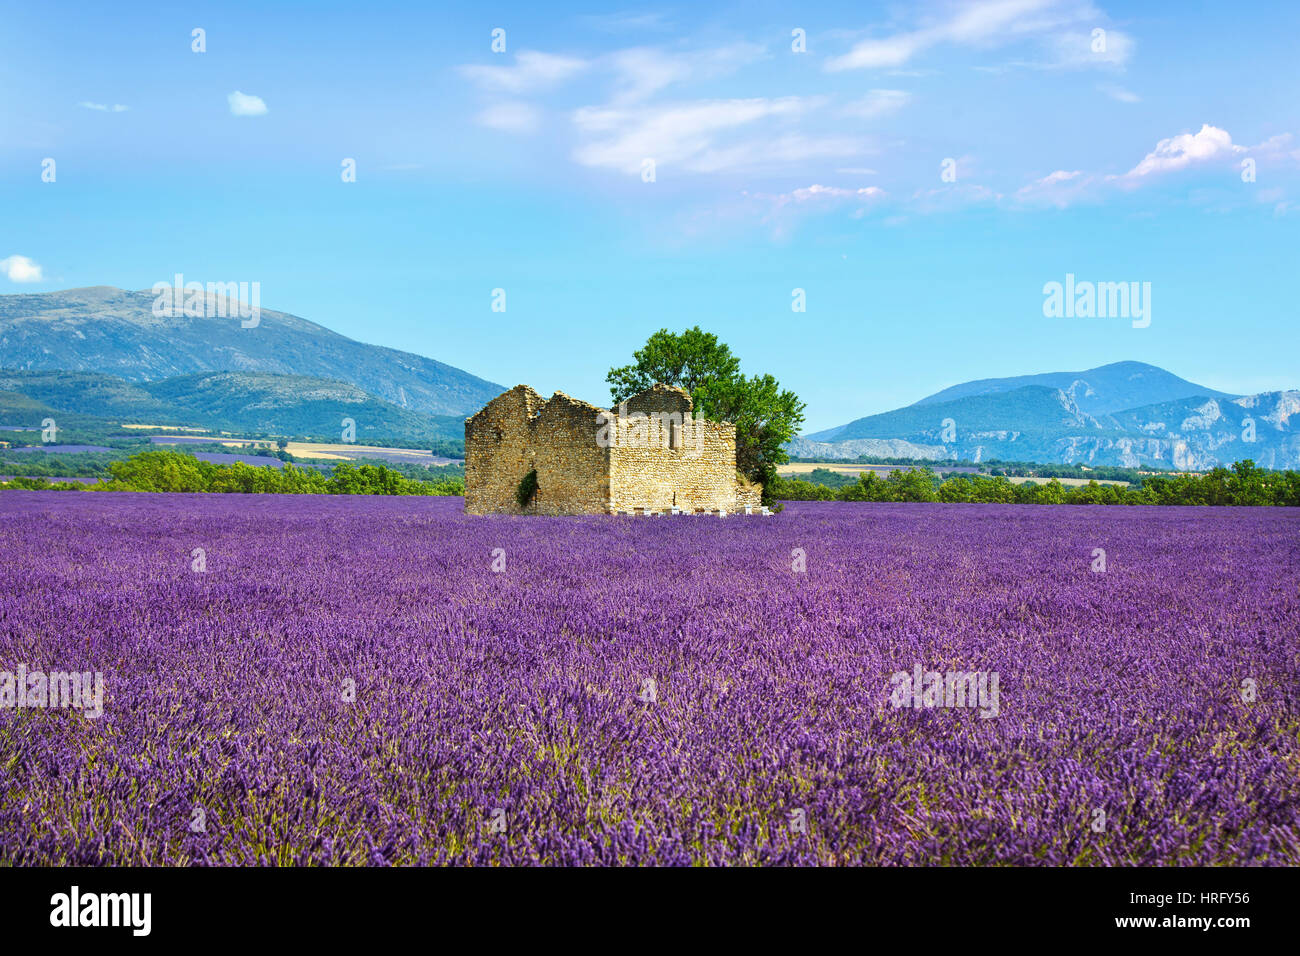 Lavender flowers blooming field, wheat, old house and lonely tree. Panoramic view. Plateau de Valensole, Provence, France, Europe. Stock Photo